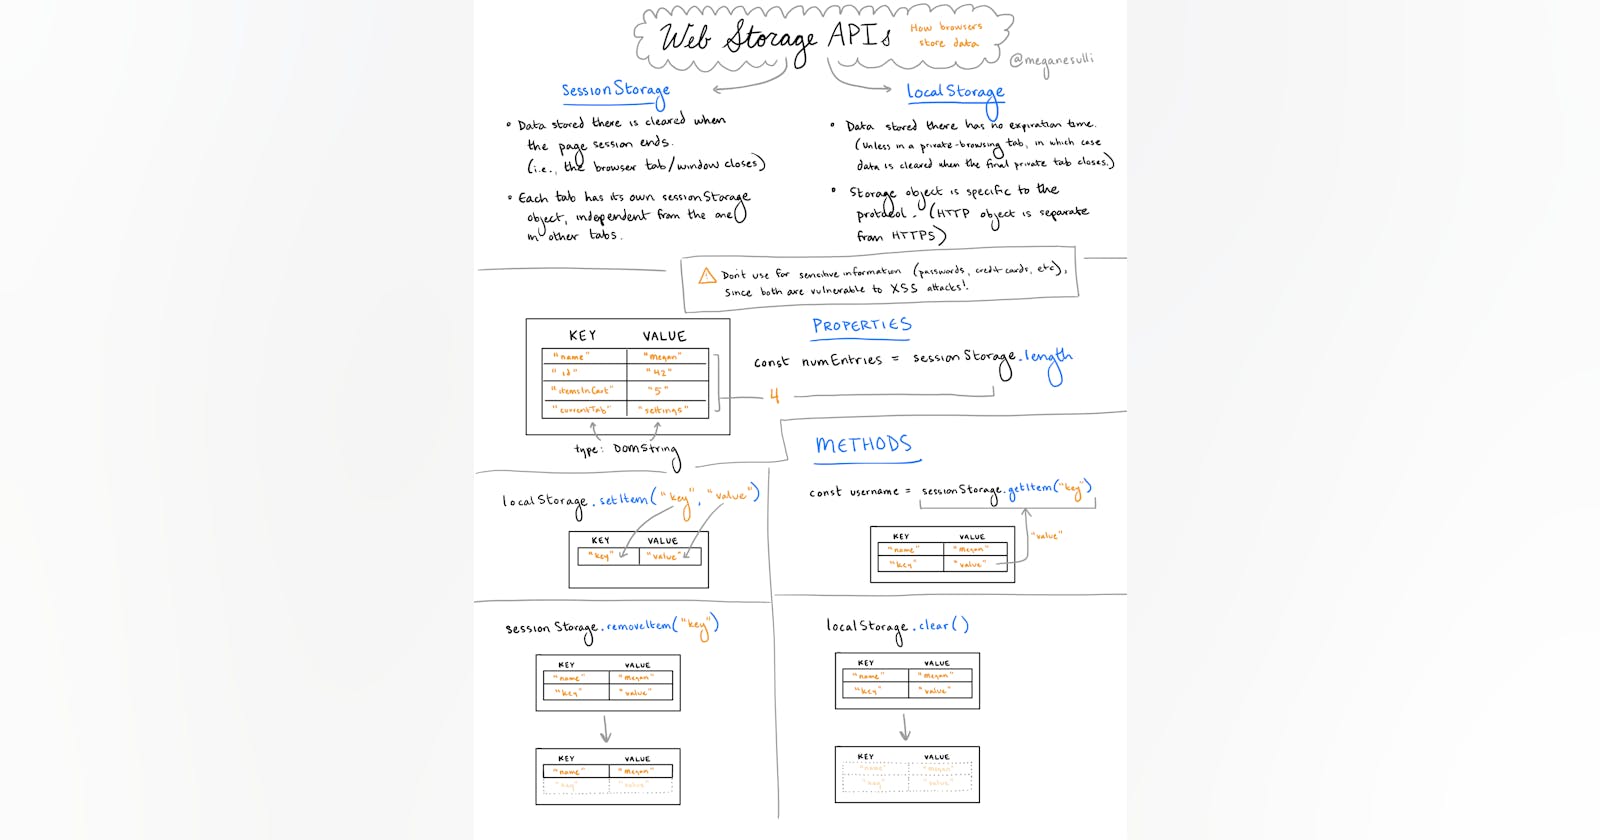 [Sketchnote] Web Storage APIs: How Browsers Store Data